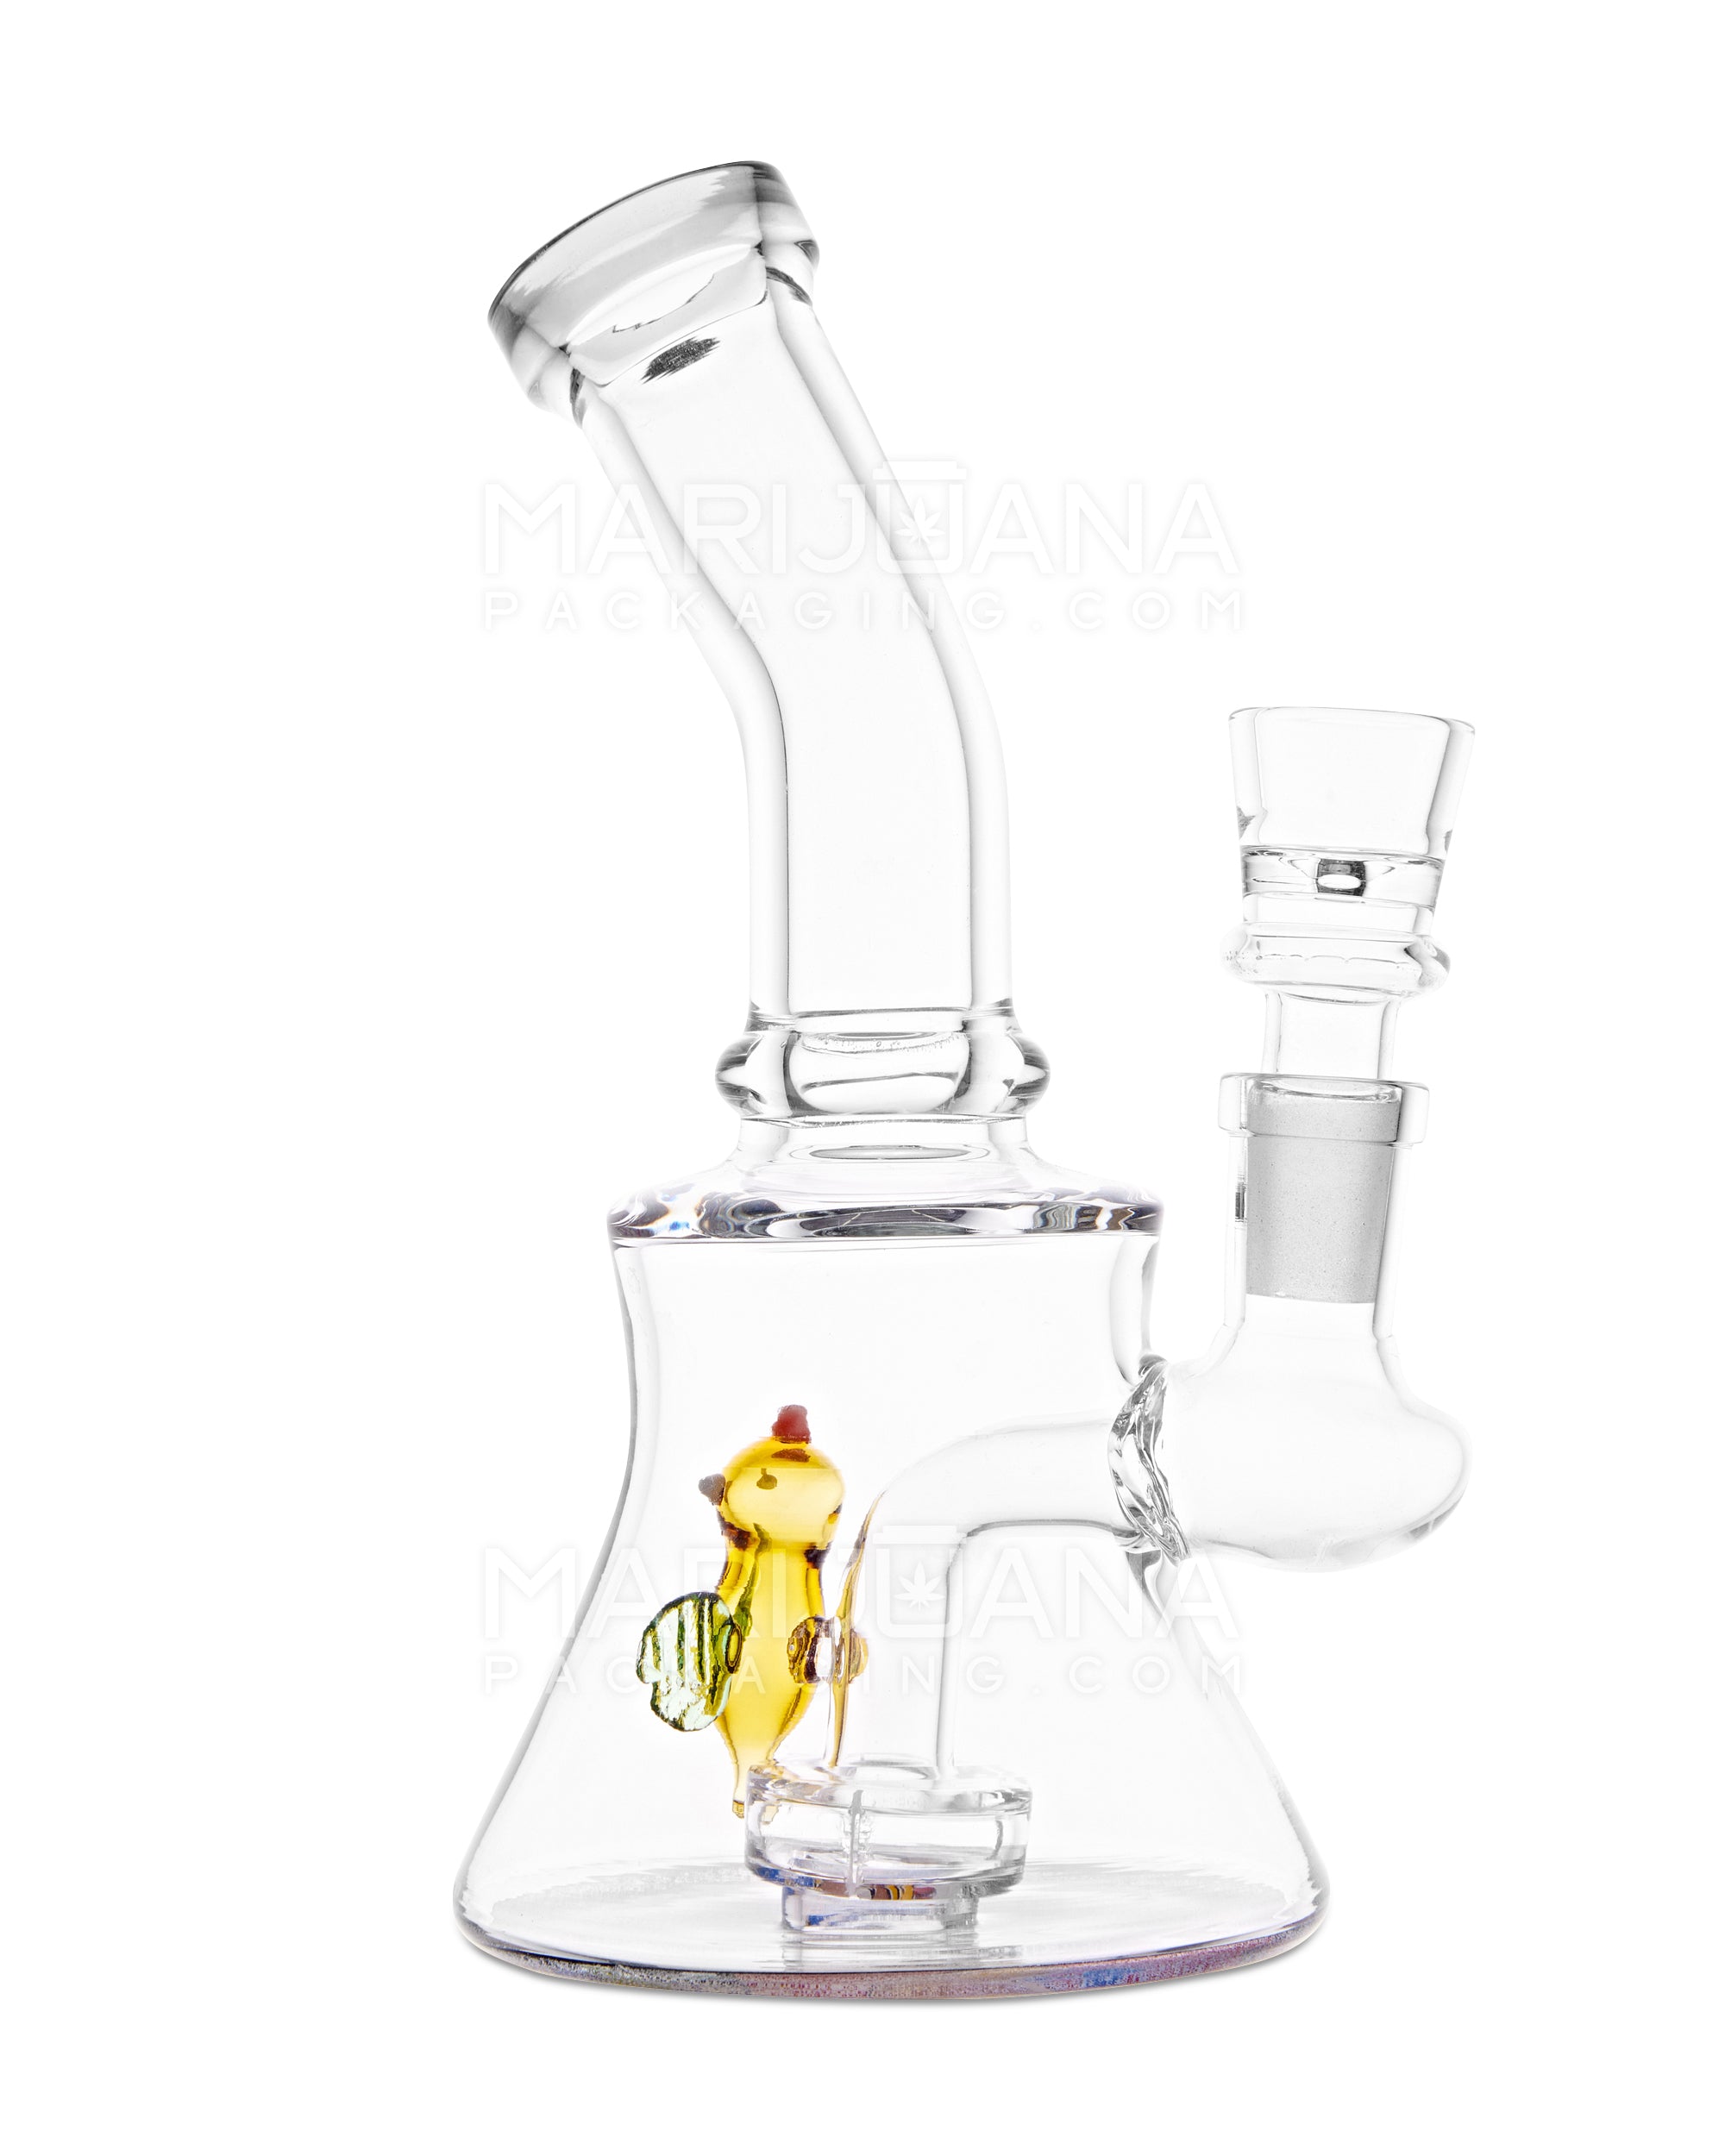 Bent Neck R&M Bee Showerhead Perc Glass Water Pipe w/ Base Decals | 7in Tall - 14mm Bowl - Assorted - 4